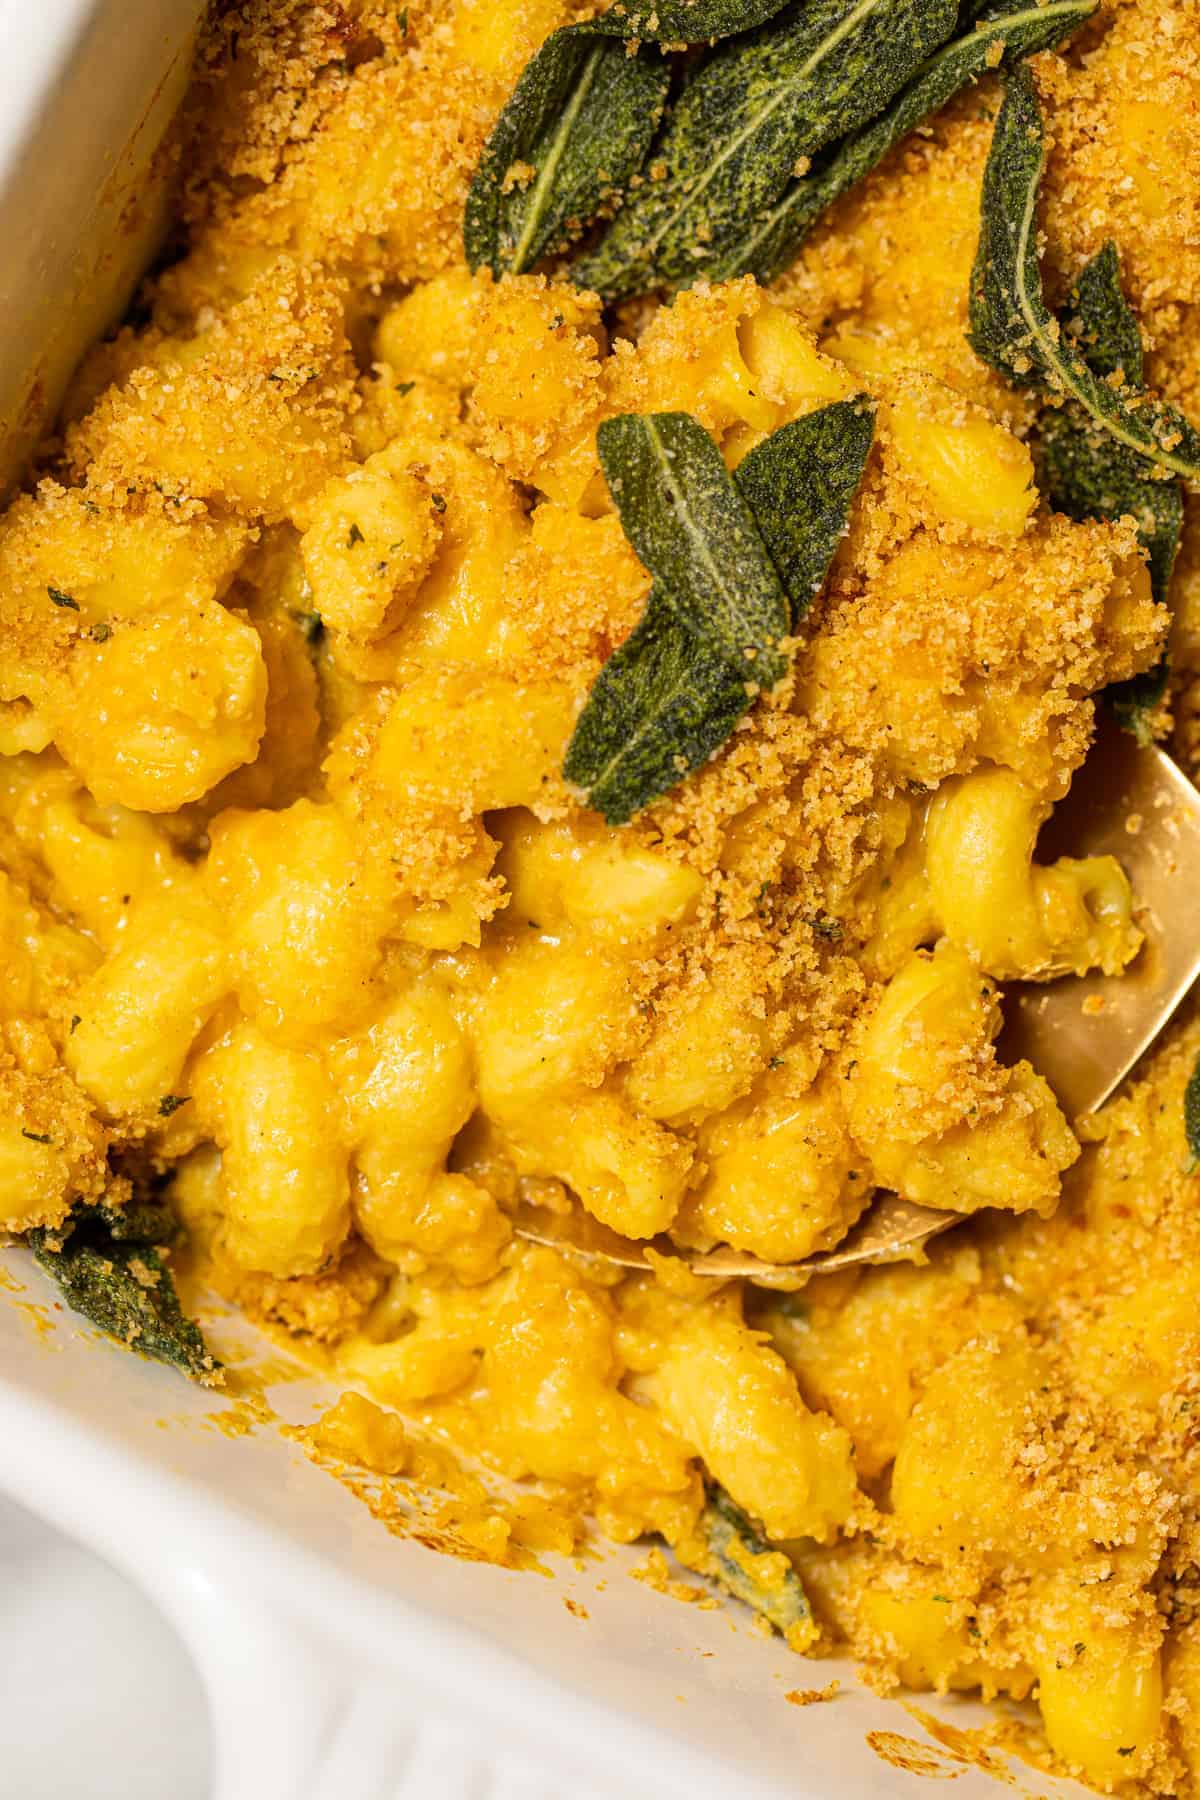 Butternut squash pasta with crispy sage leaves.